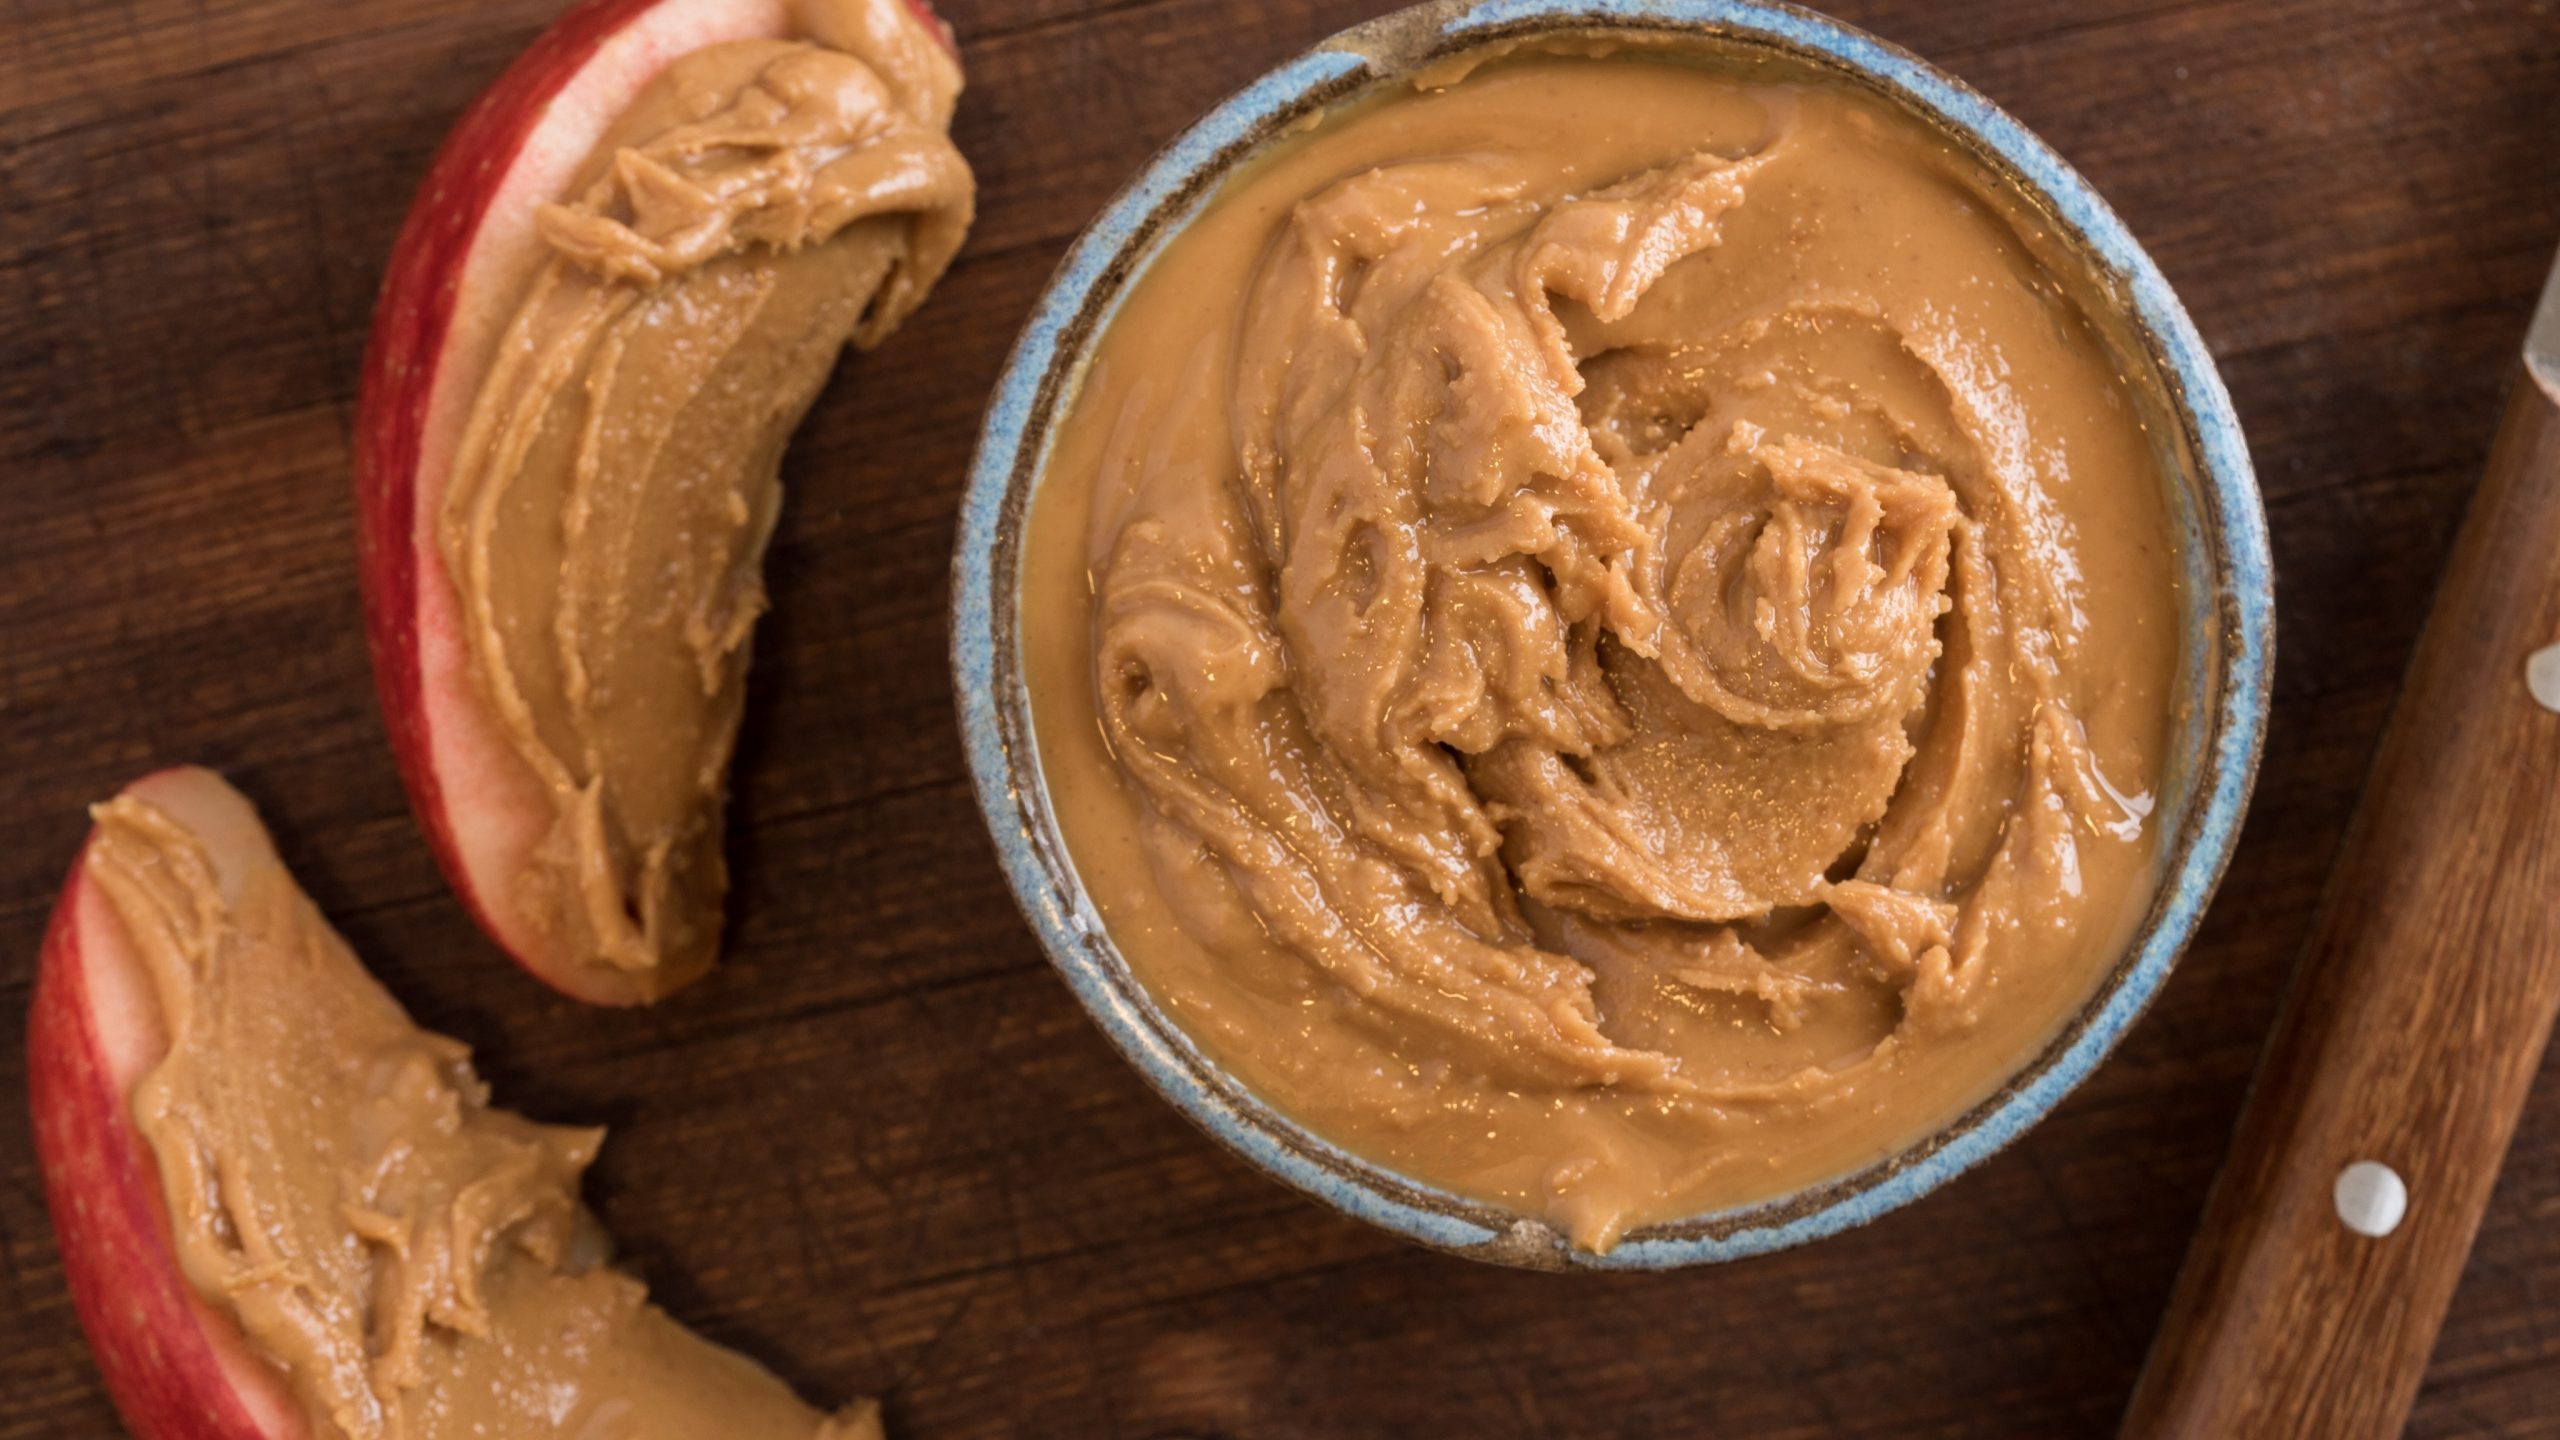 Peanut butter dip with apples